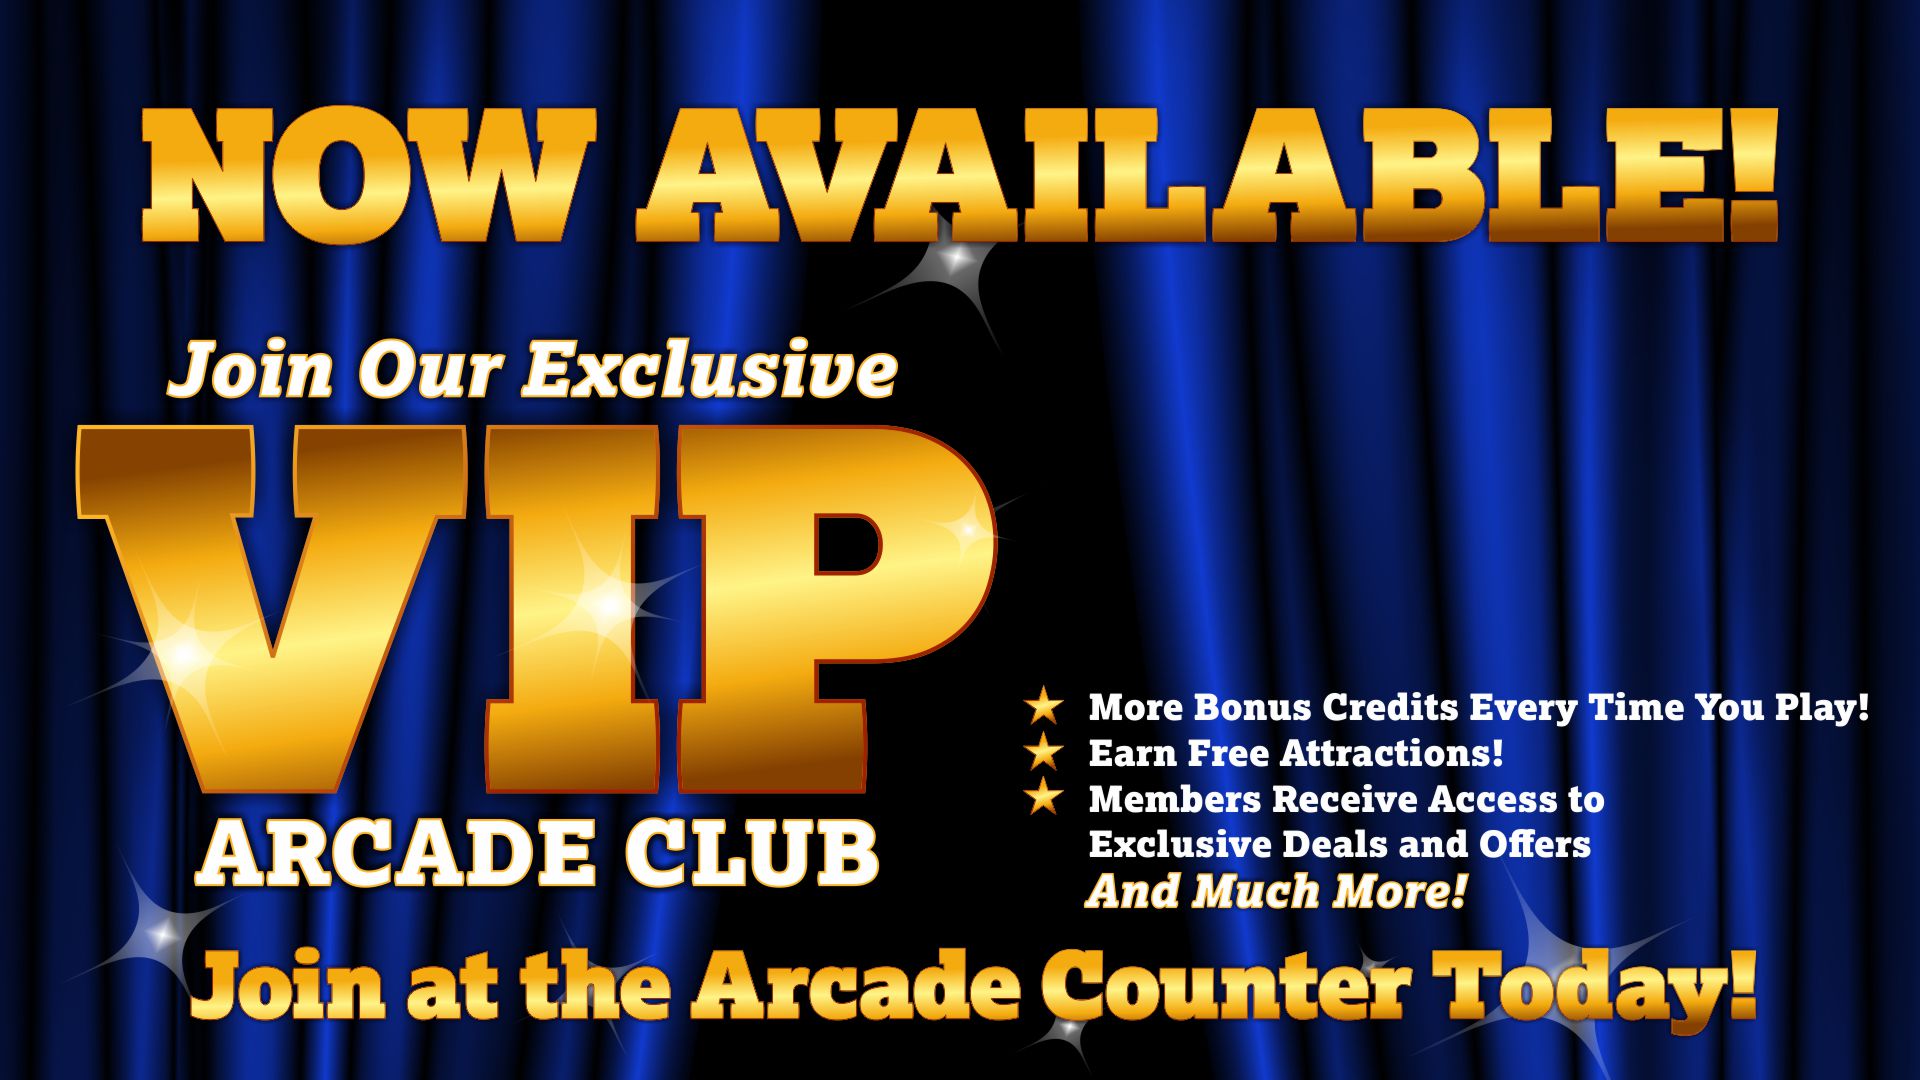 For VIP privileges, please see